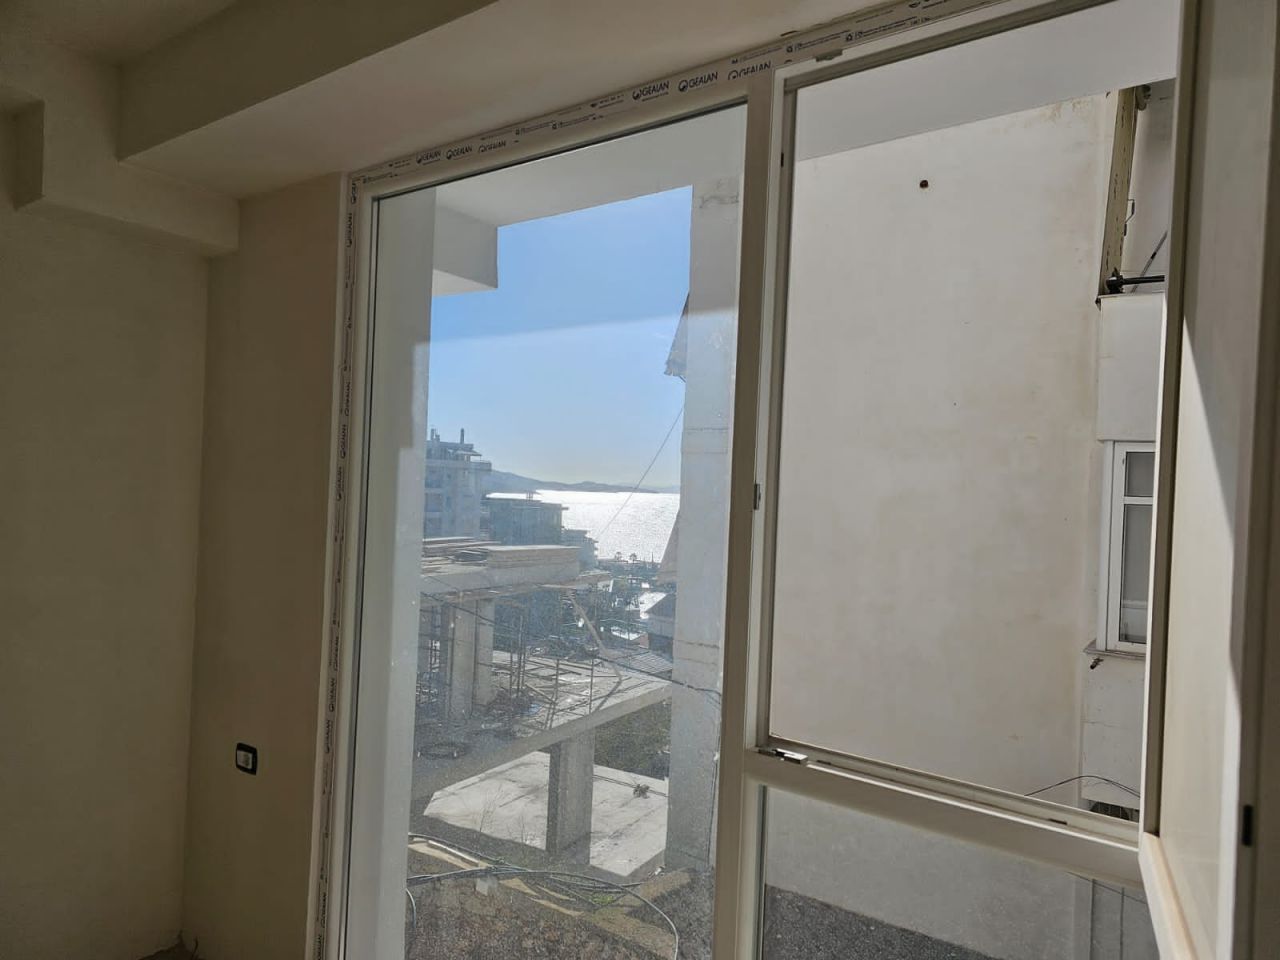 Duplex Apartment For Sale In Saranda, Close To The Beach, With All The Facilities Nearby